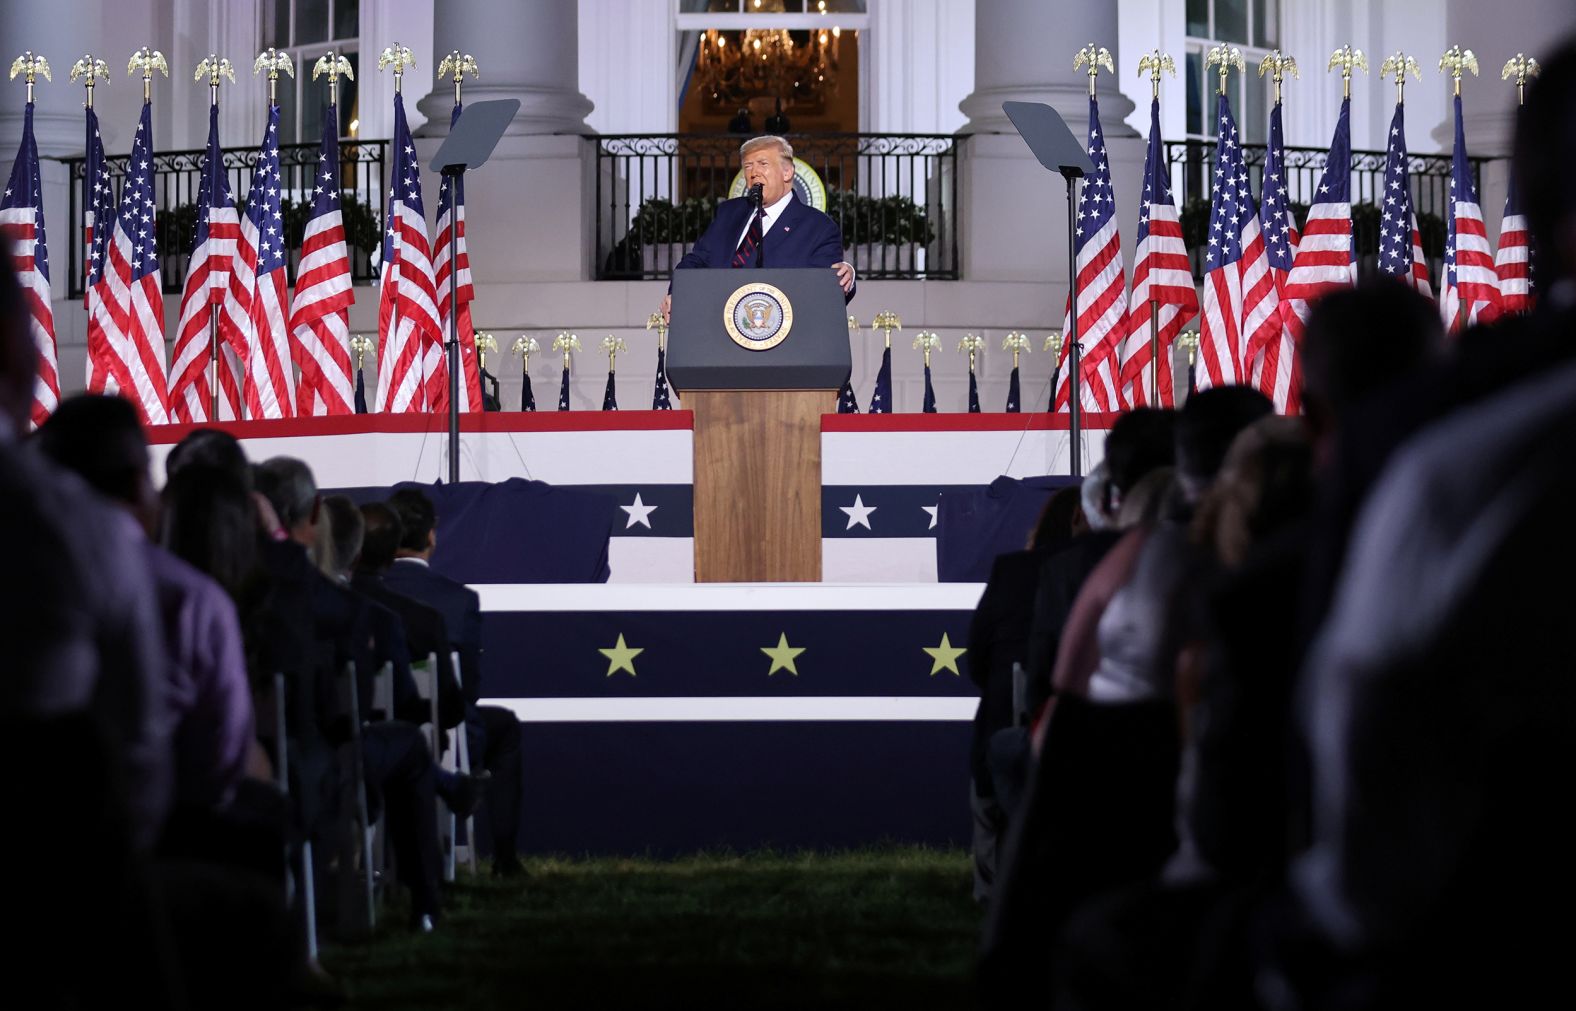 Trump spoke at length about <a href="https://www.cnn.com/politics/live-news/rnc-2020-day-4/h_18a79d4745cef17bf3fc3190b6cc4a86" target="_blank">his law-and-order message,</a> claiming the platform of Democratic nominee Joe Biden is an "attack on public safety."